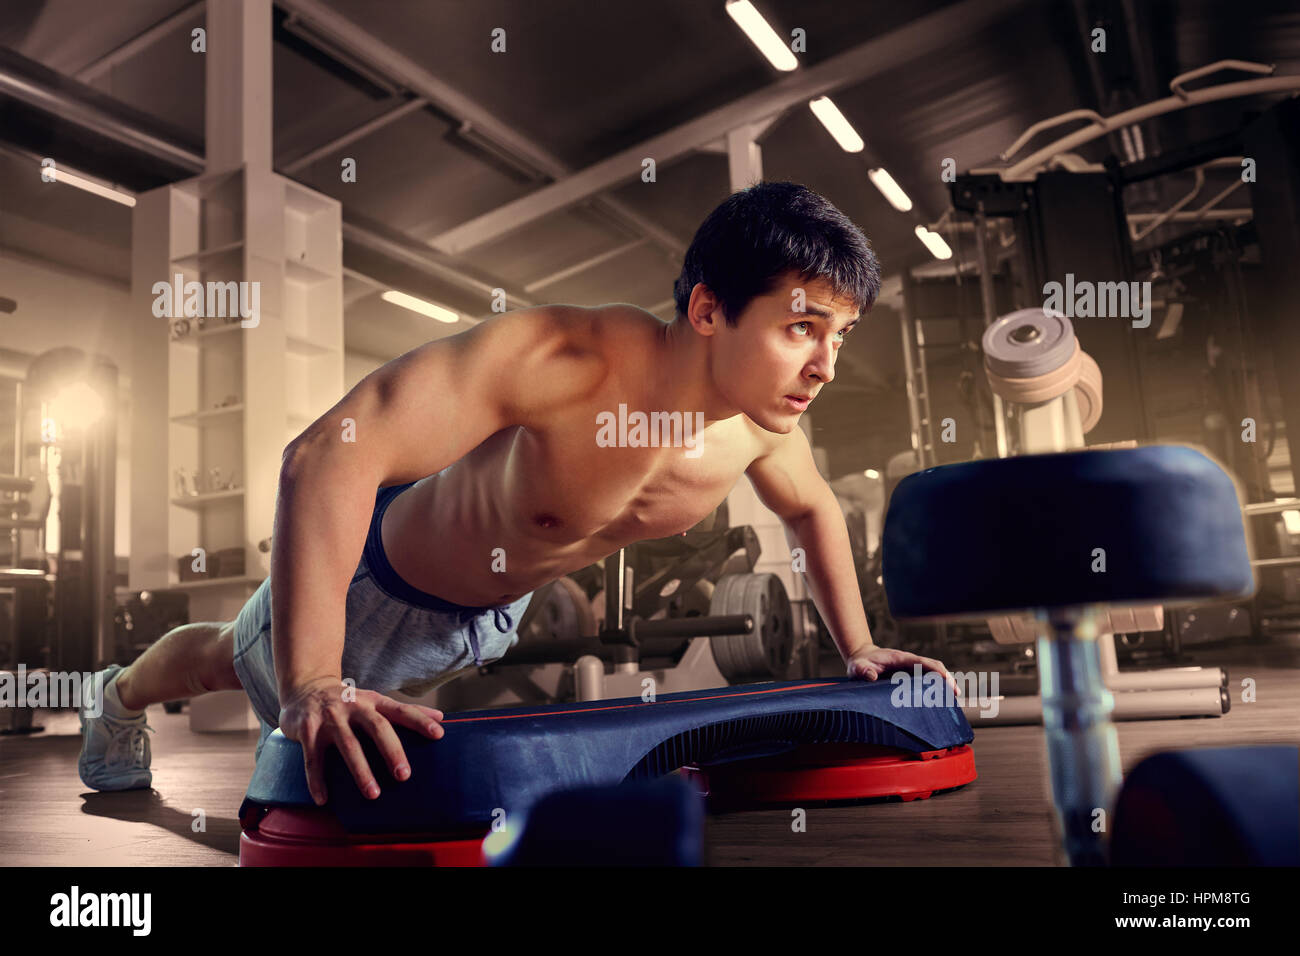 Athletic man is pushed to the floor in the gym Stock Photo